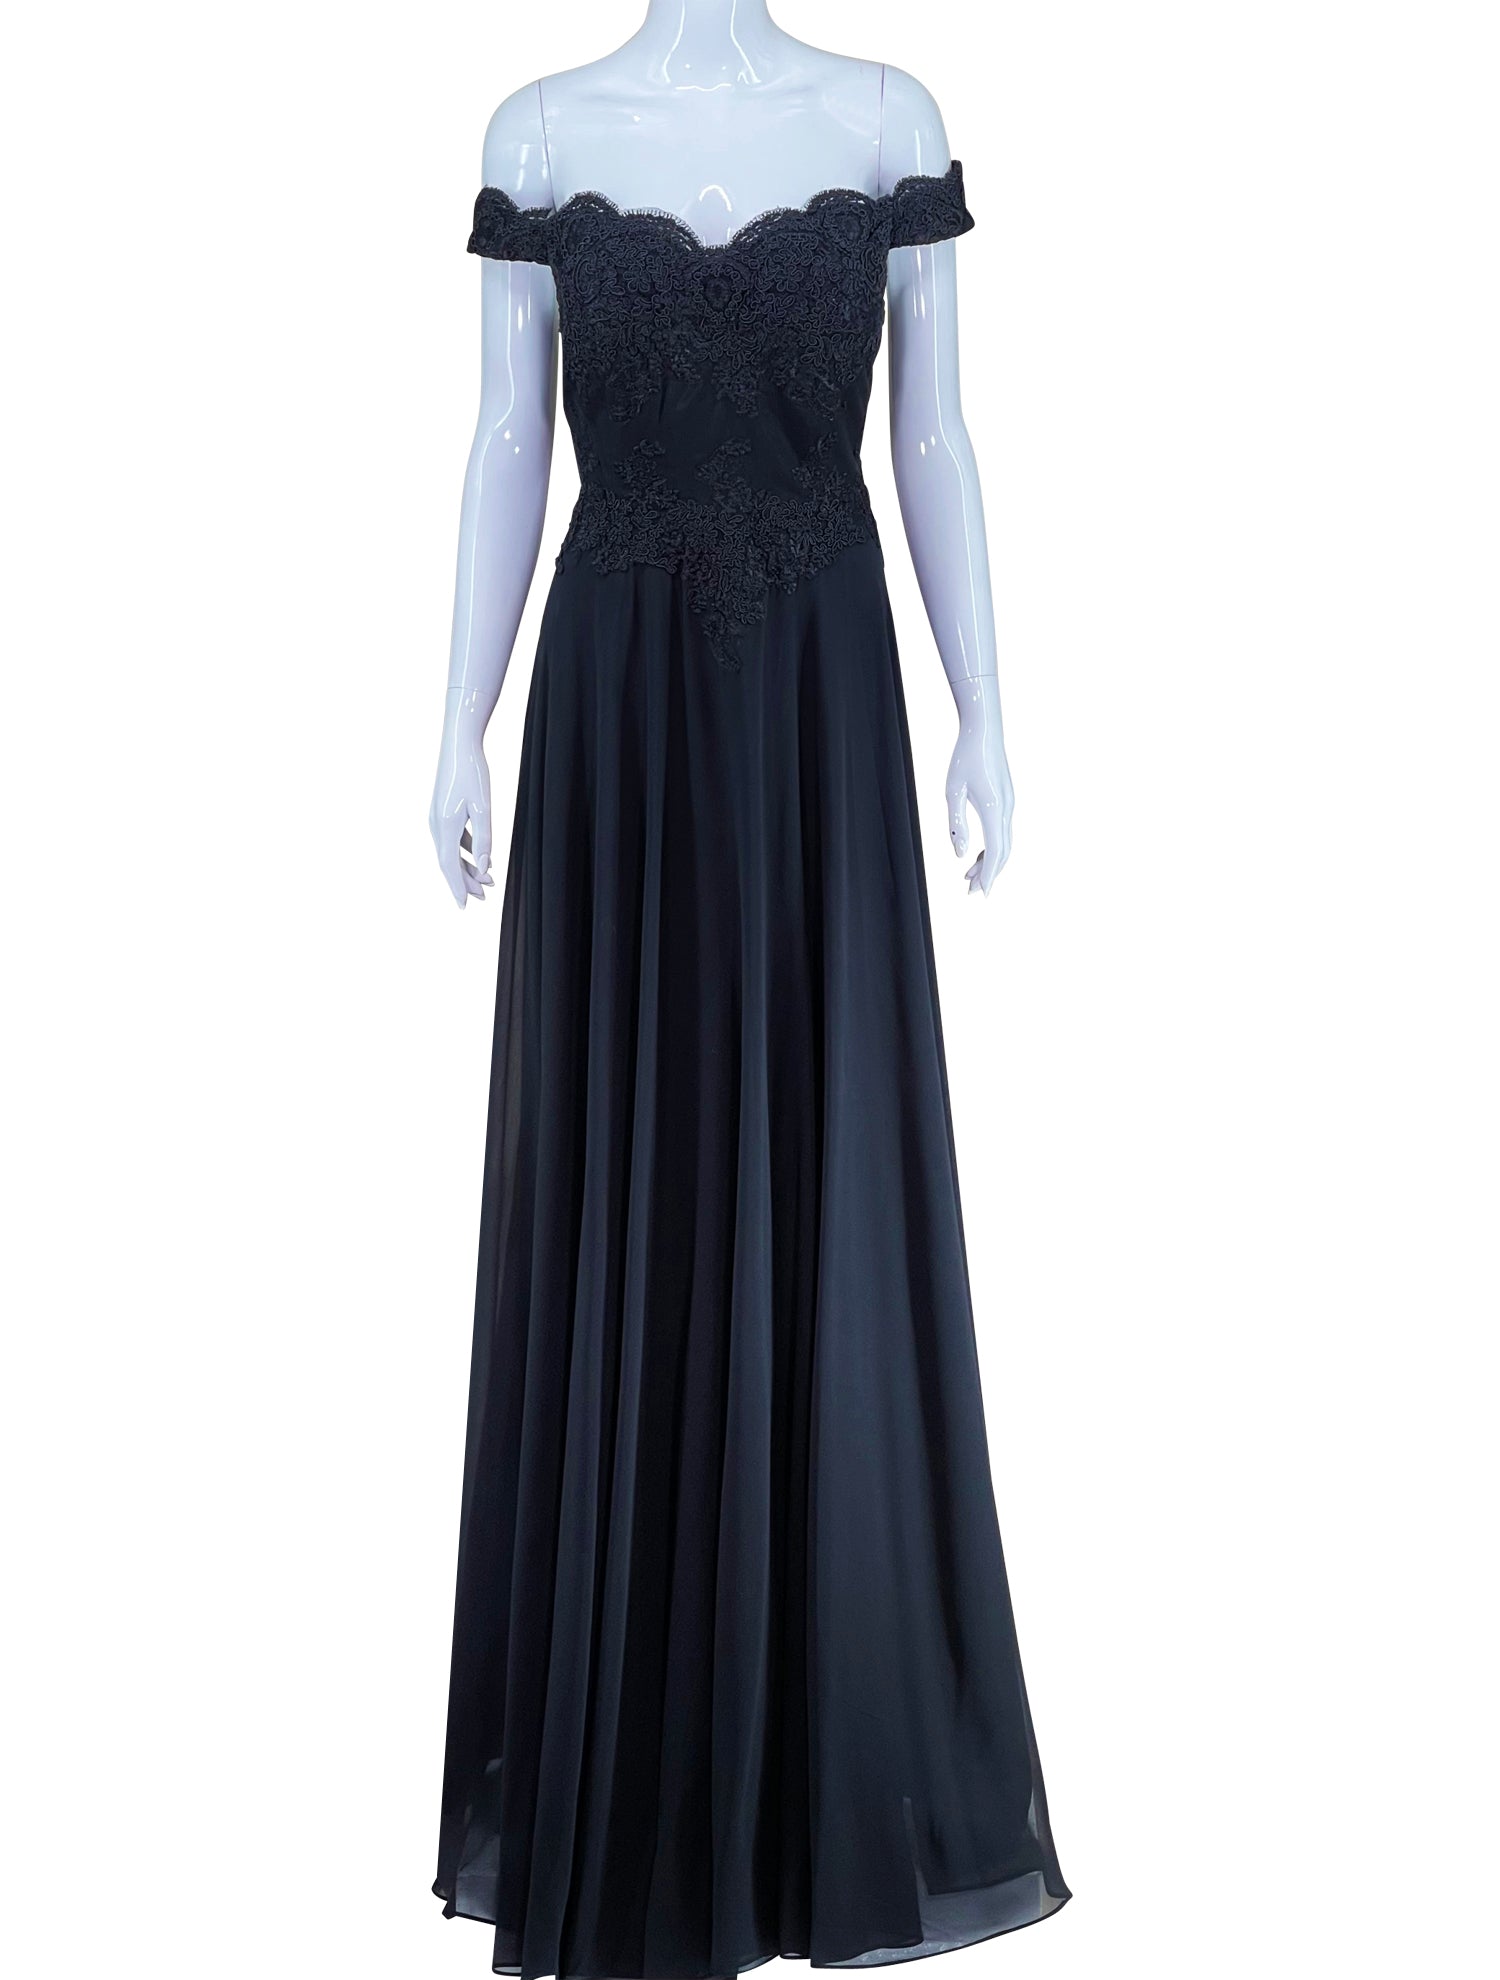 Cinderella Divine Black Lace Embroidered Evening Gown